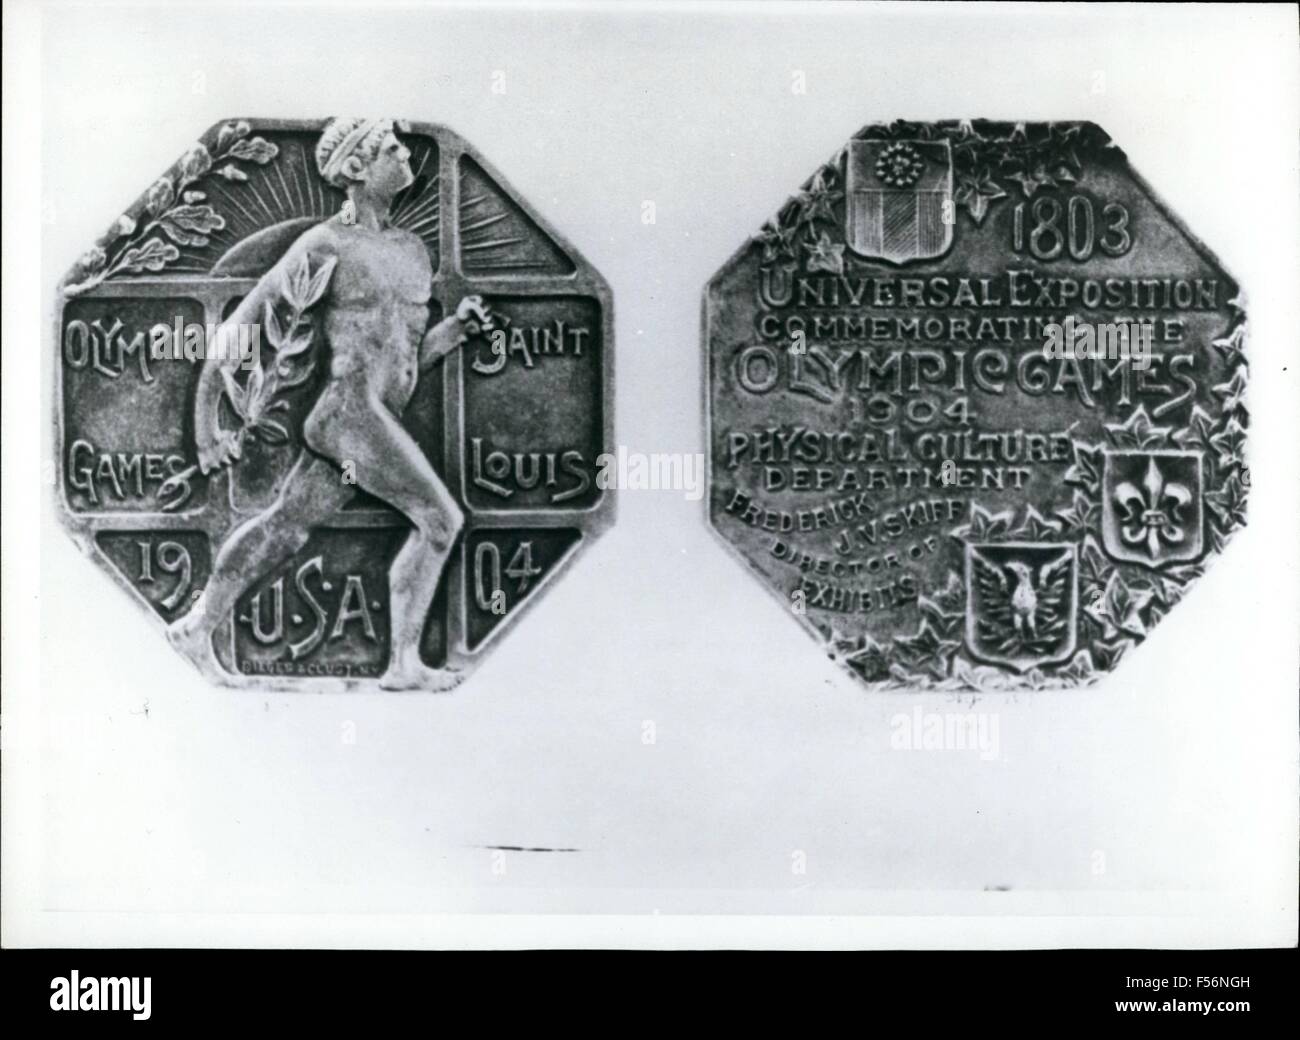 1962 - The very first medal for Canada won by the montrealer Etienne Desmarteau at the hammer throw, at the Olympic Games in St. Louis USA, in 1940. Keystone Montreal, Canada. © Keystone Pictures USA/ZUMAPRESS.com/Alamy Live News Stock Photo